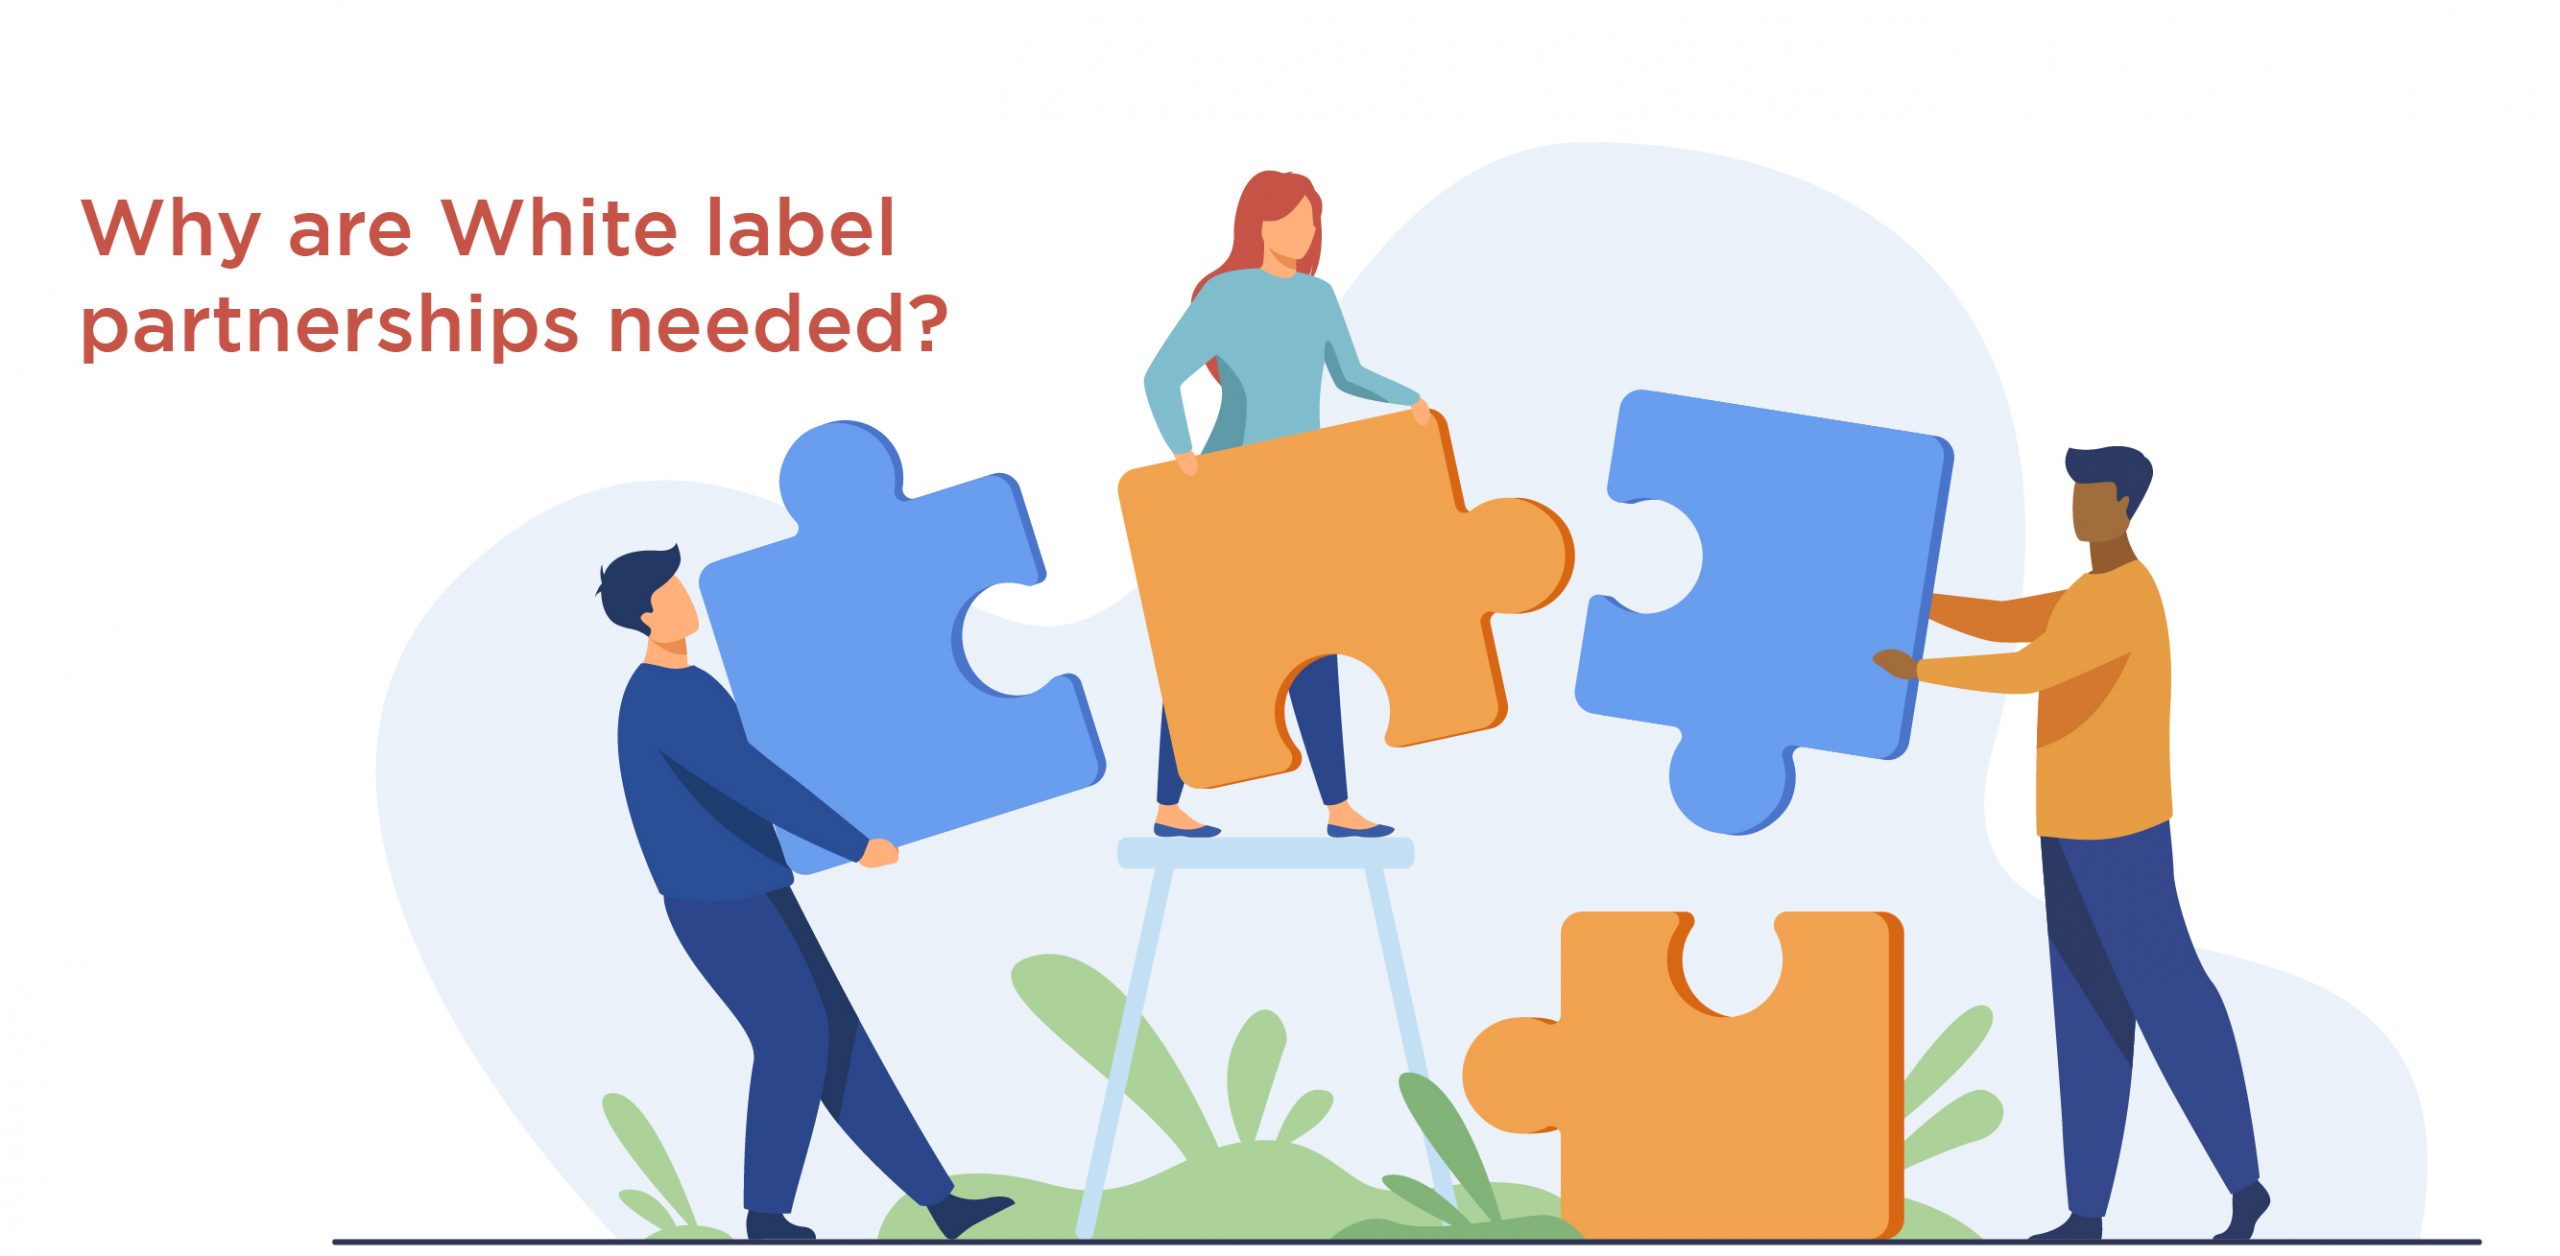 Why are White label partnerships needed? 